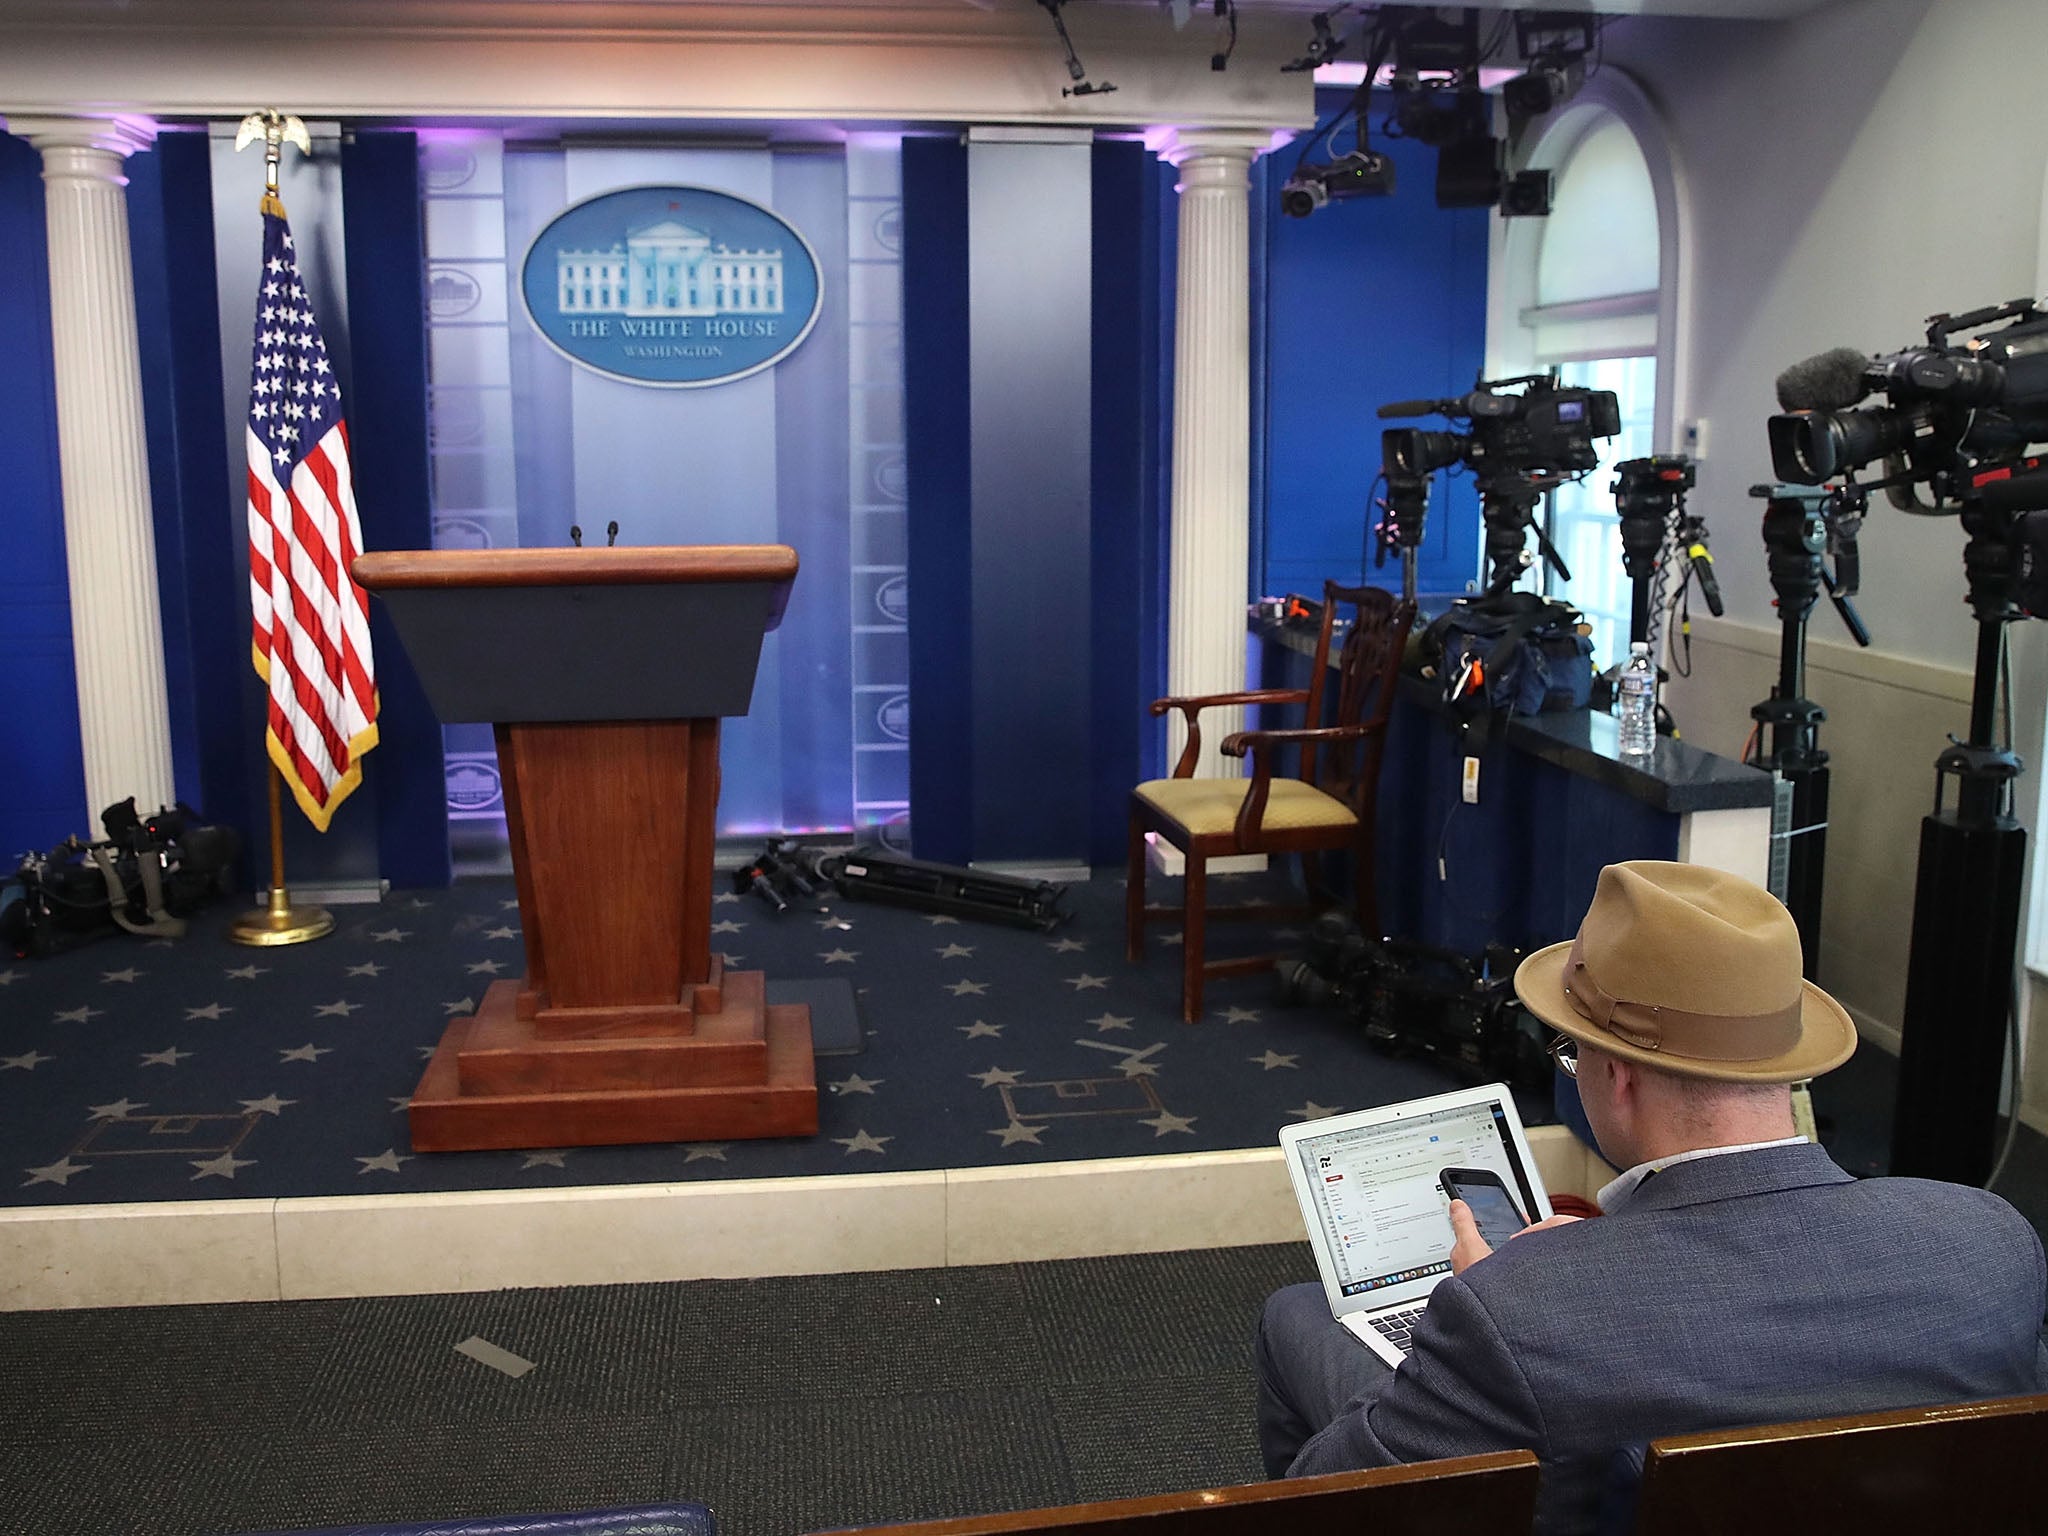 New York Times reporter Glenn Thrush works in the Brady Briefing Room after being excluded from a press gaggle by White House Press Secretary Sean Spicer, on 24 February